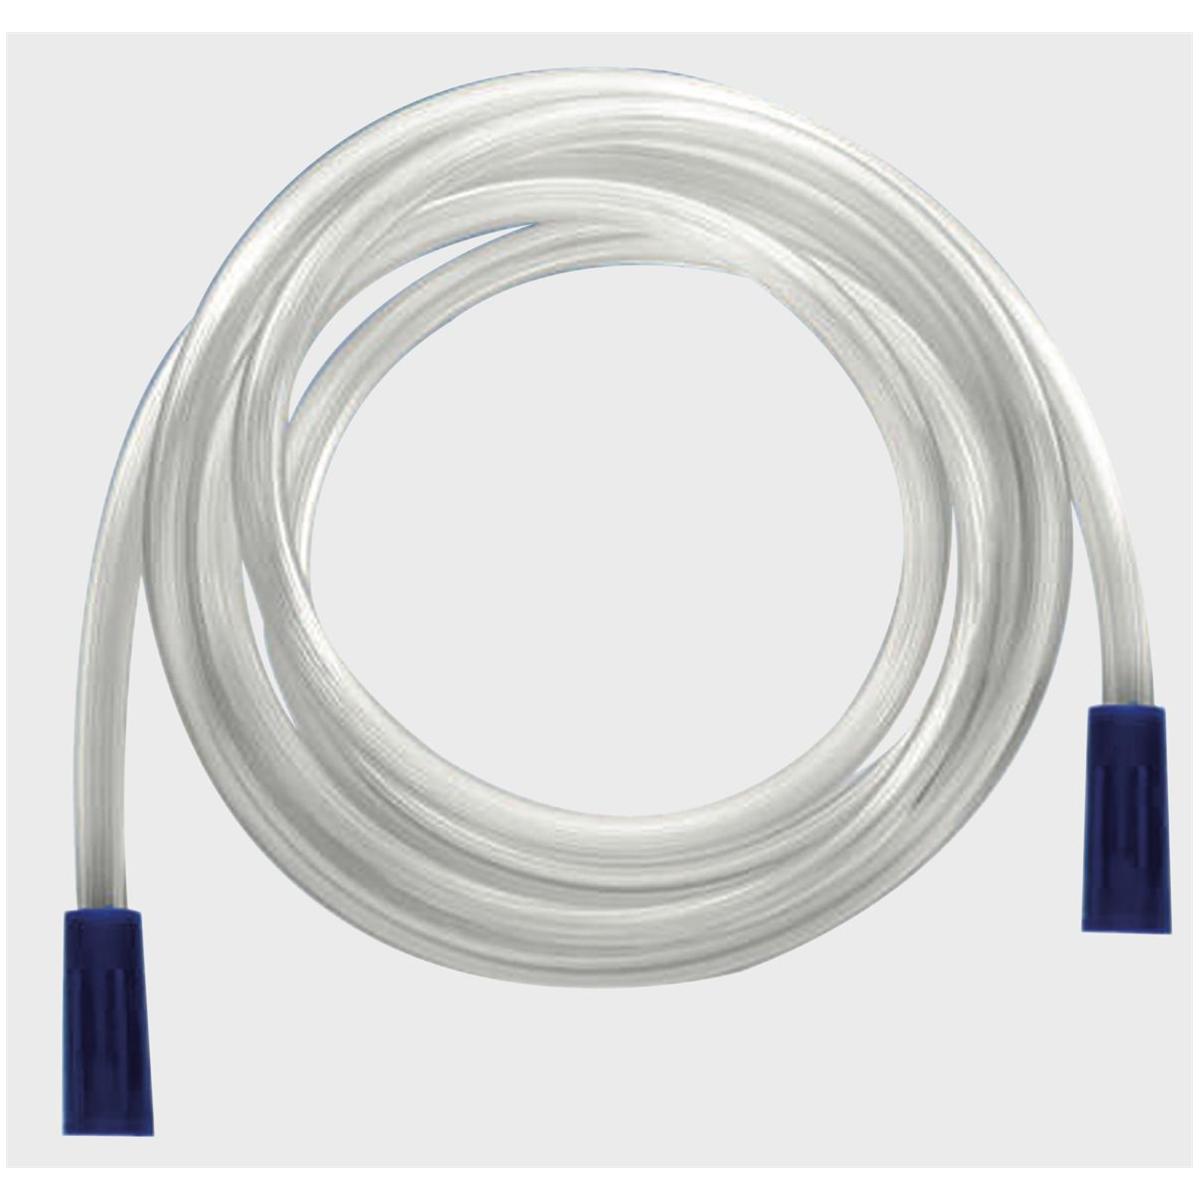 Suction Tubing With Conical Connection 185cm 10pk